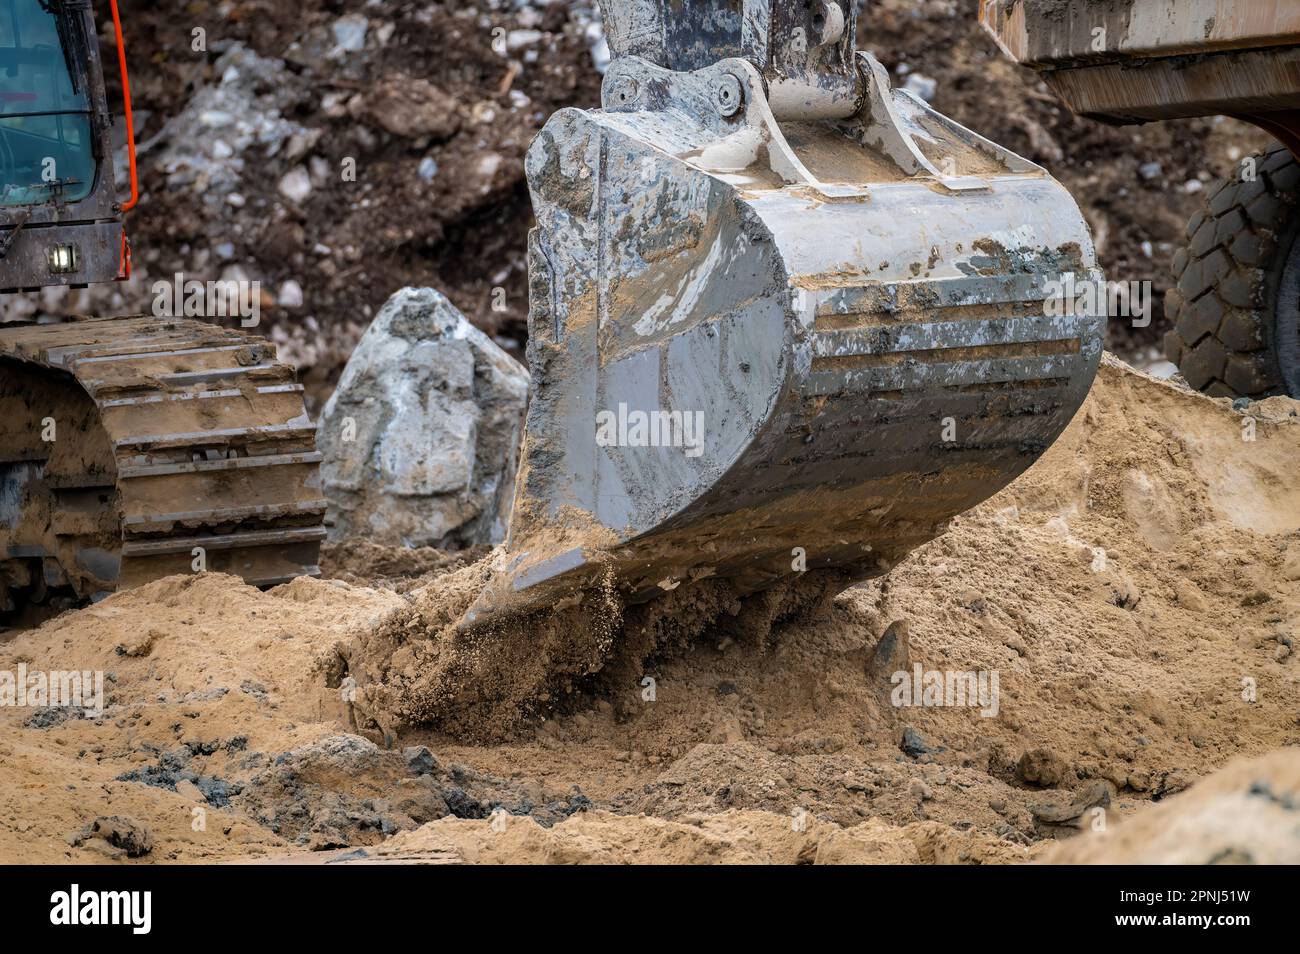 Close-up image of an excavator bucket emptying sand, motion Stock Photo